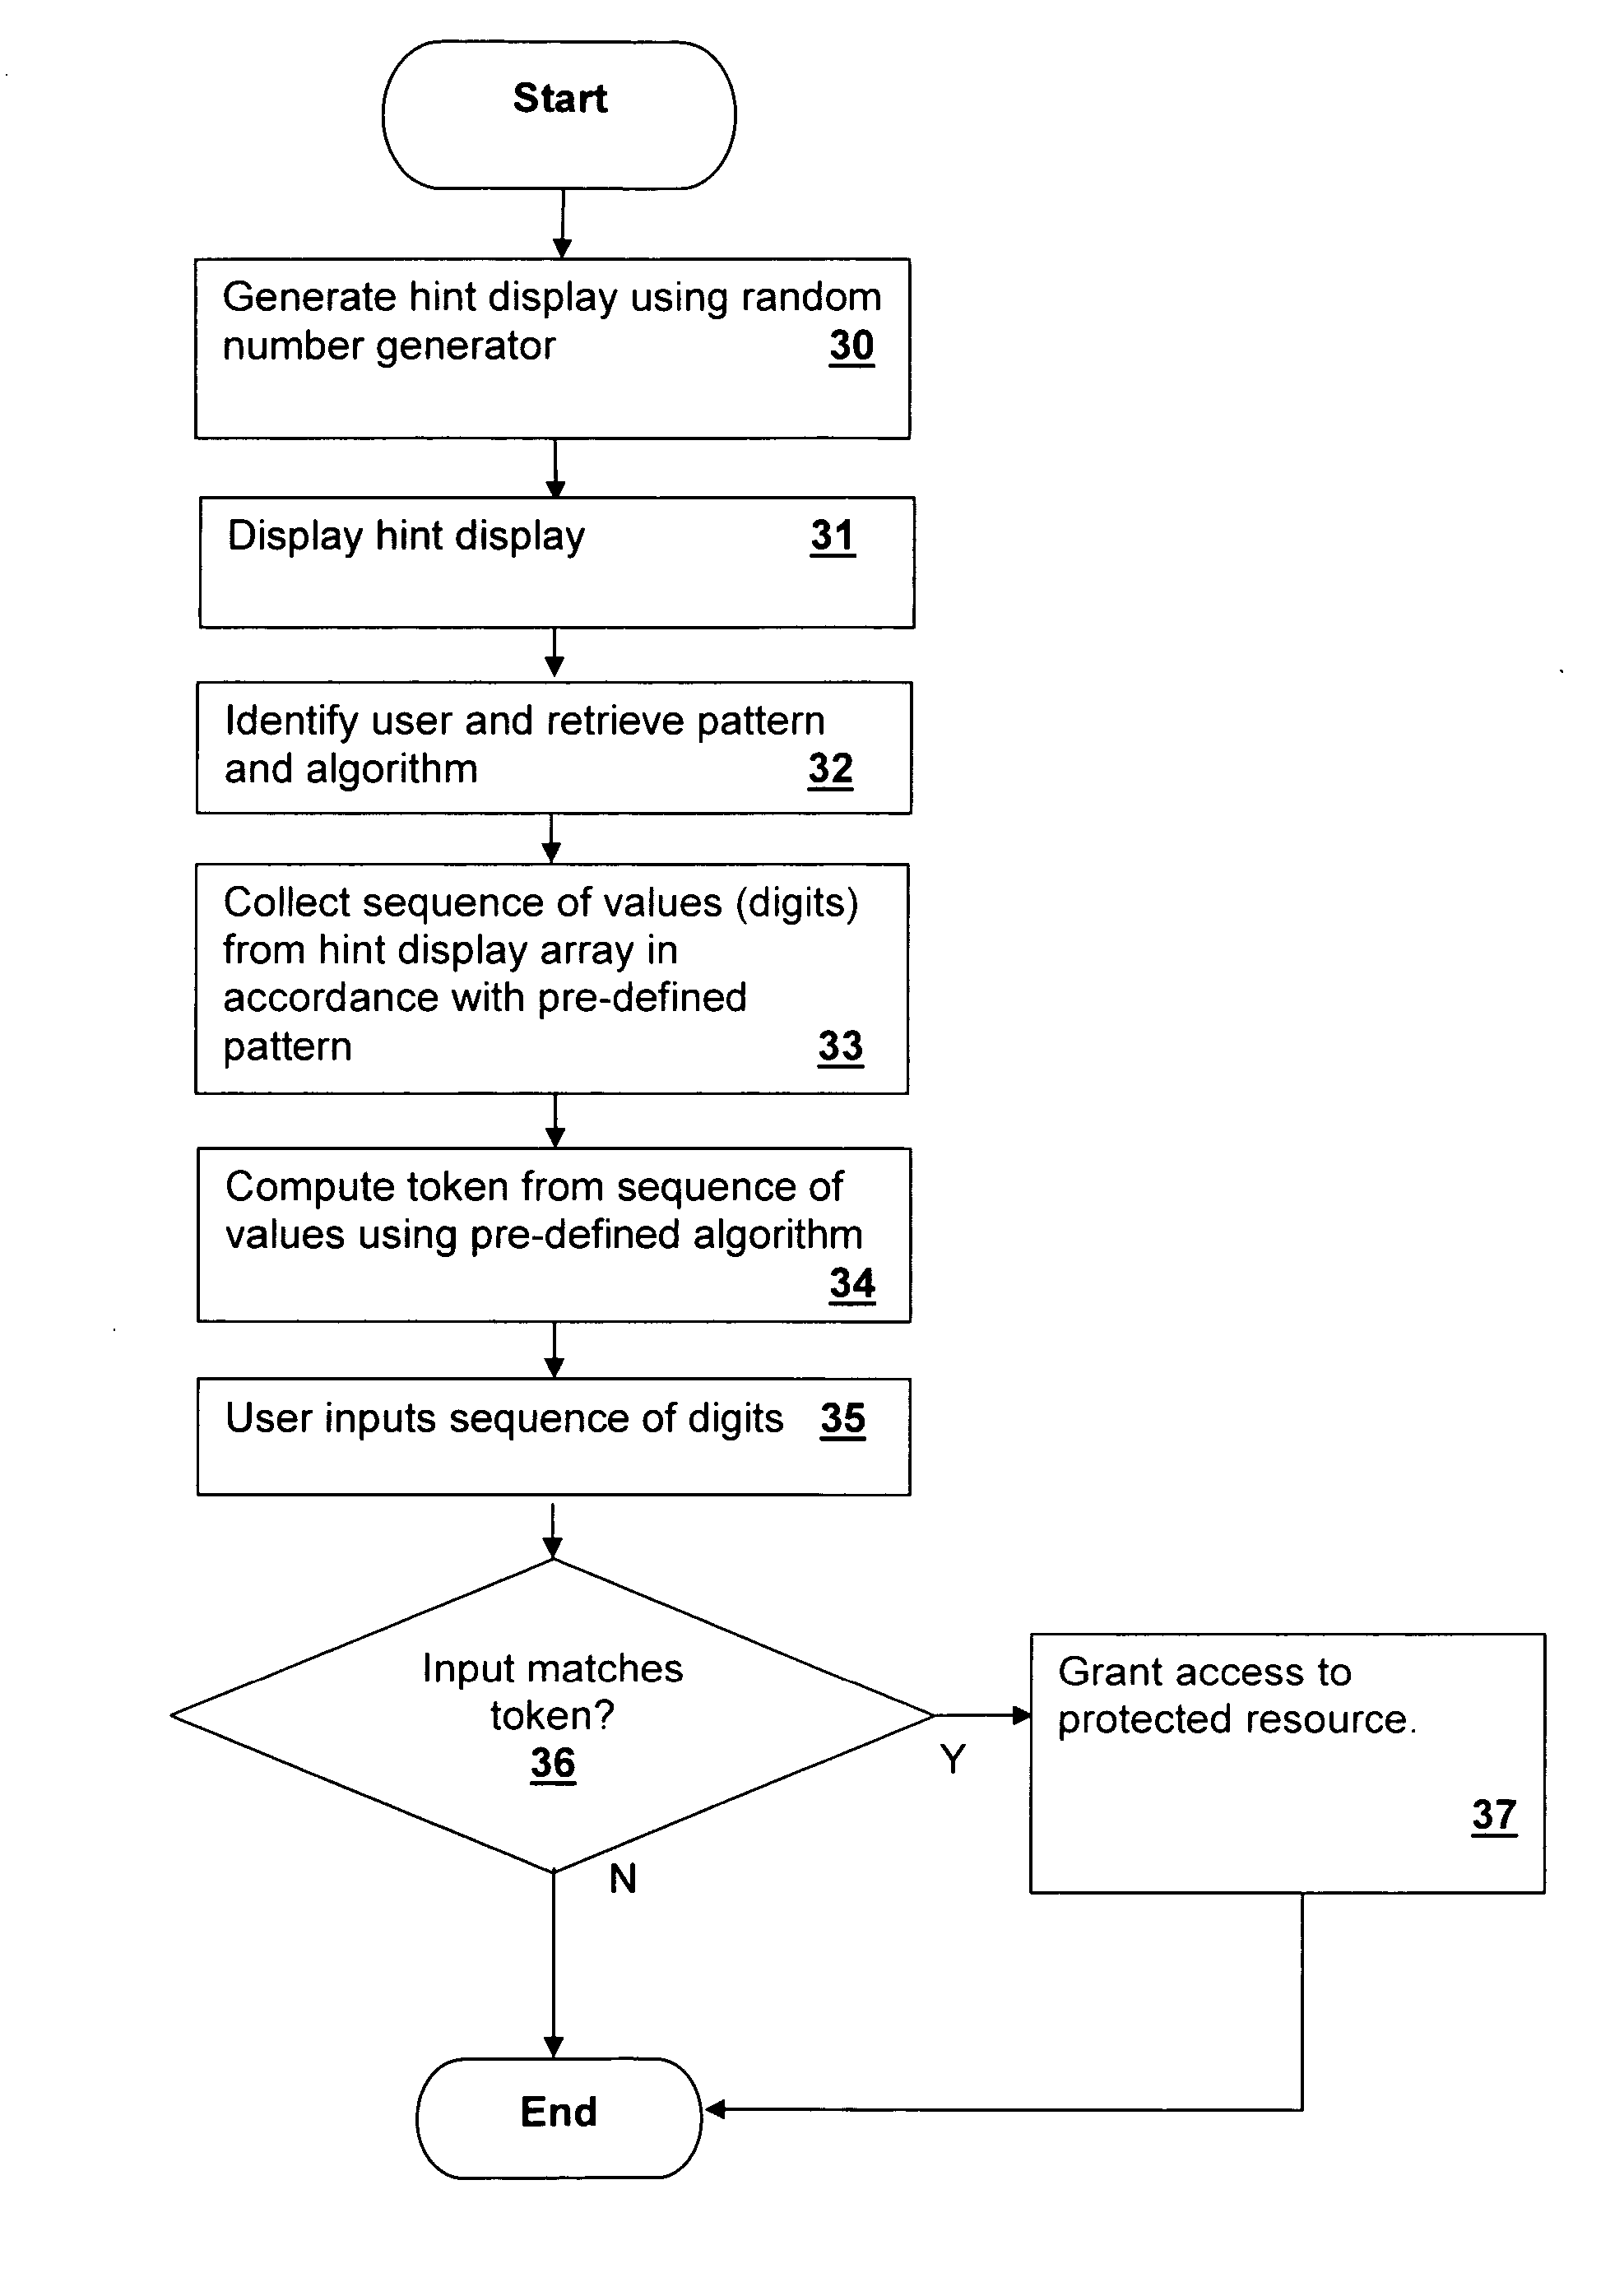 Method and system for securing interface access via visual array paths in combination with hidden operators